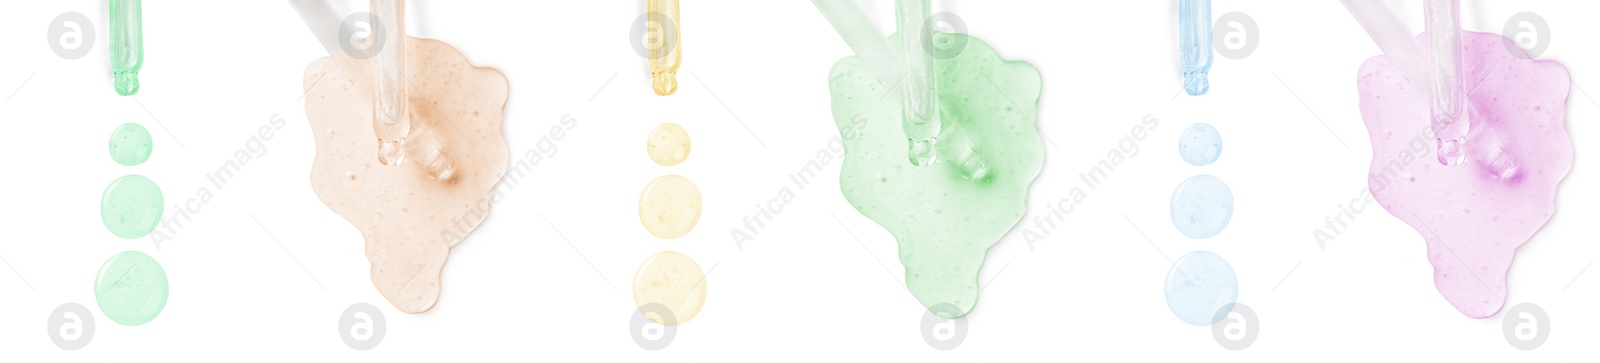 Image of Droppers with serum on white background, top view. Skin care product